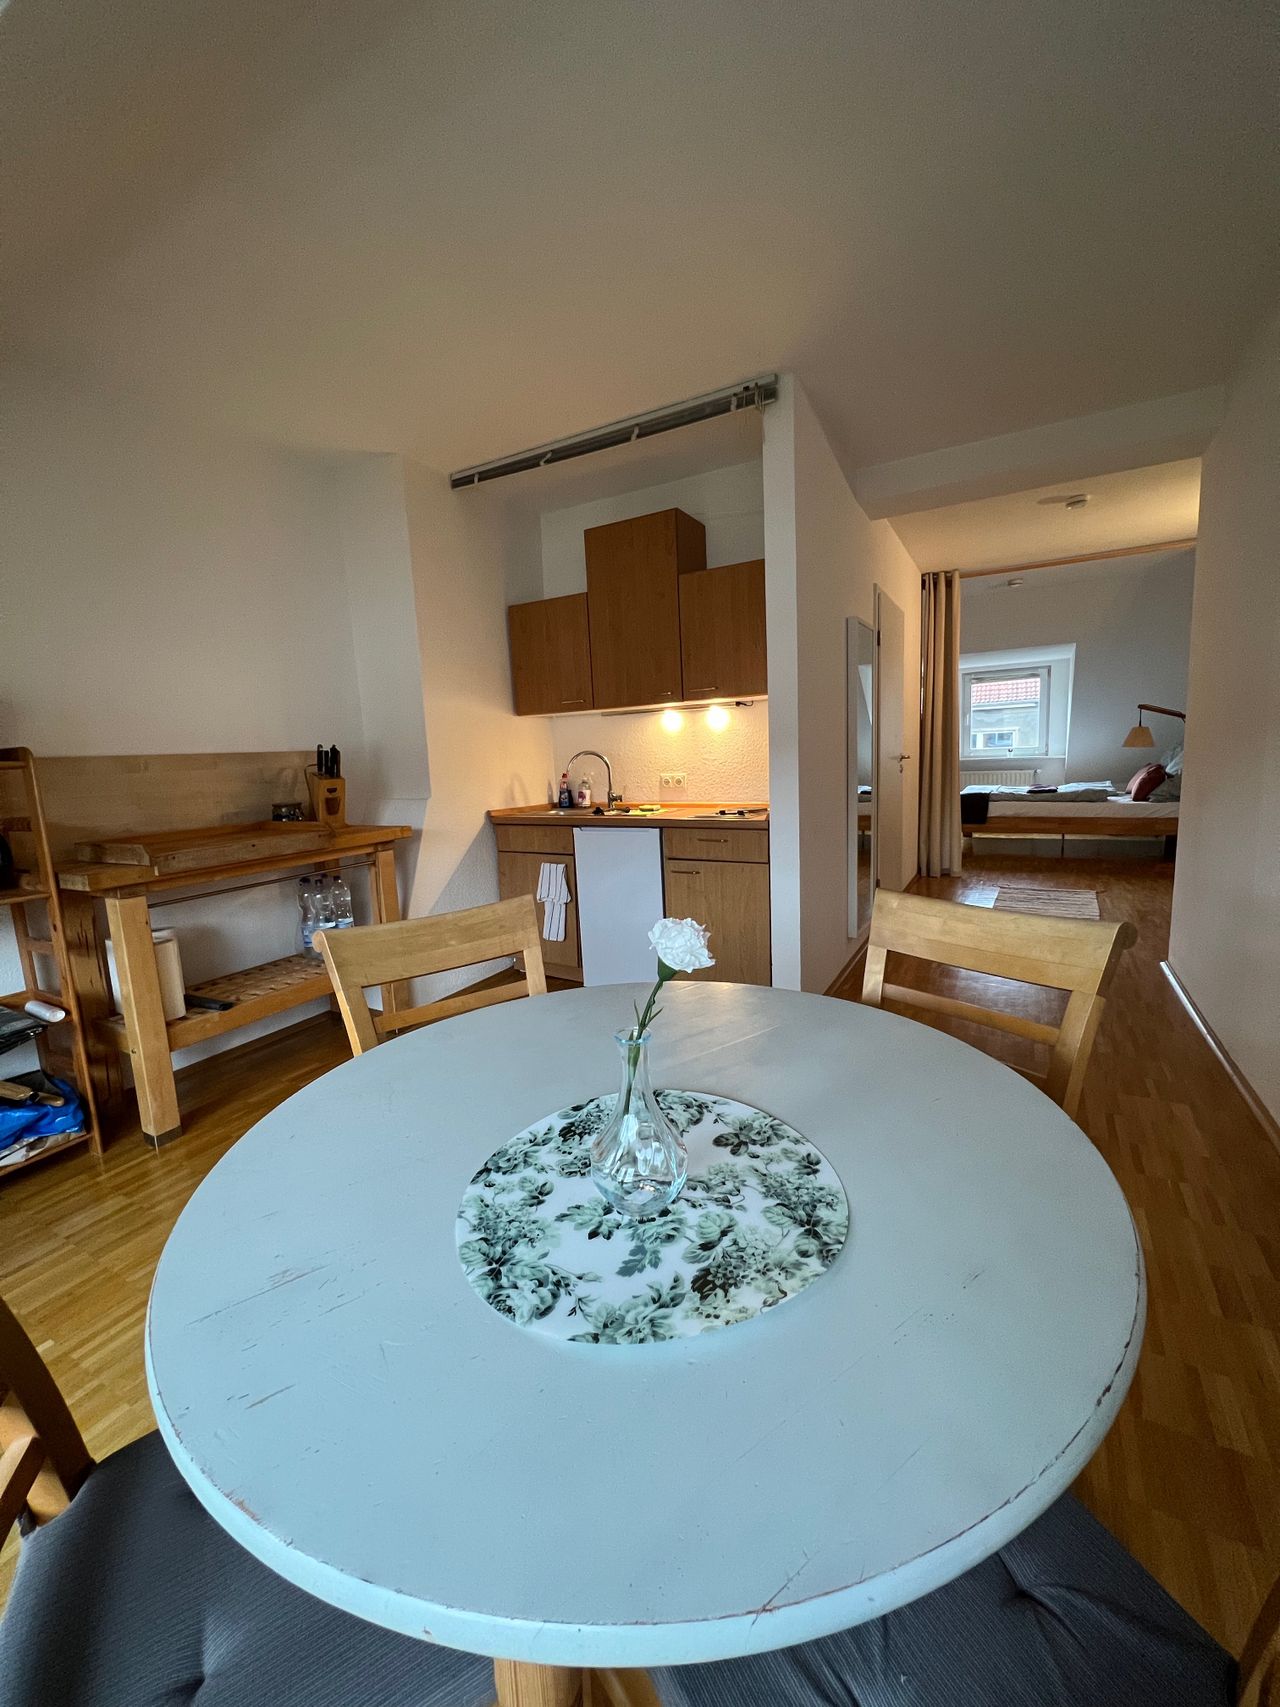 Nice & Cozy Apartment, centrally located in Dortmund